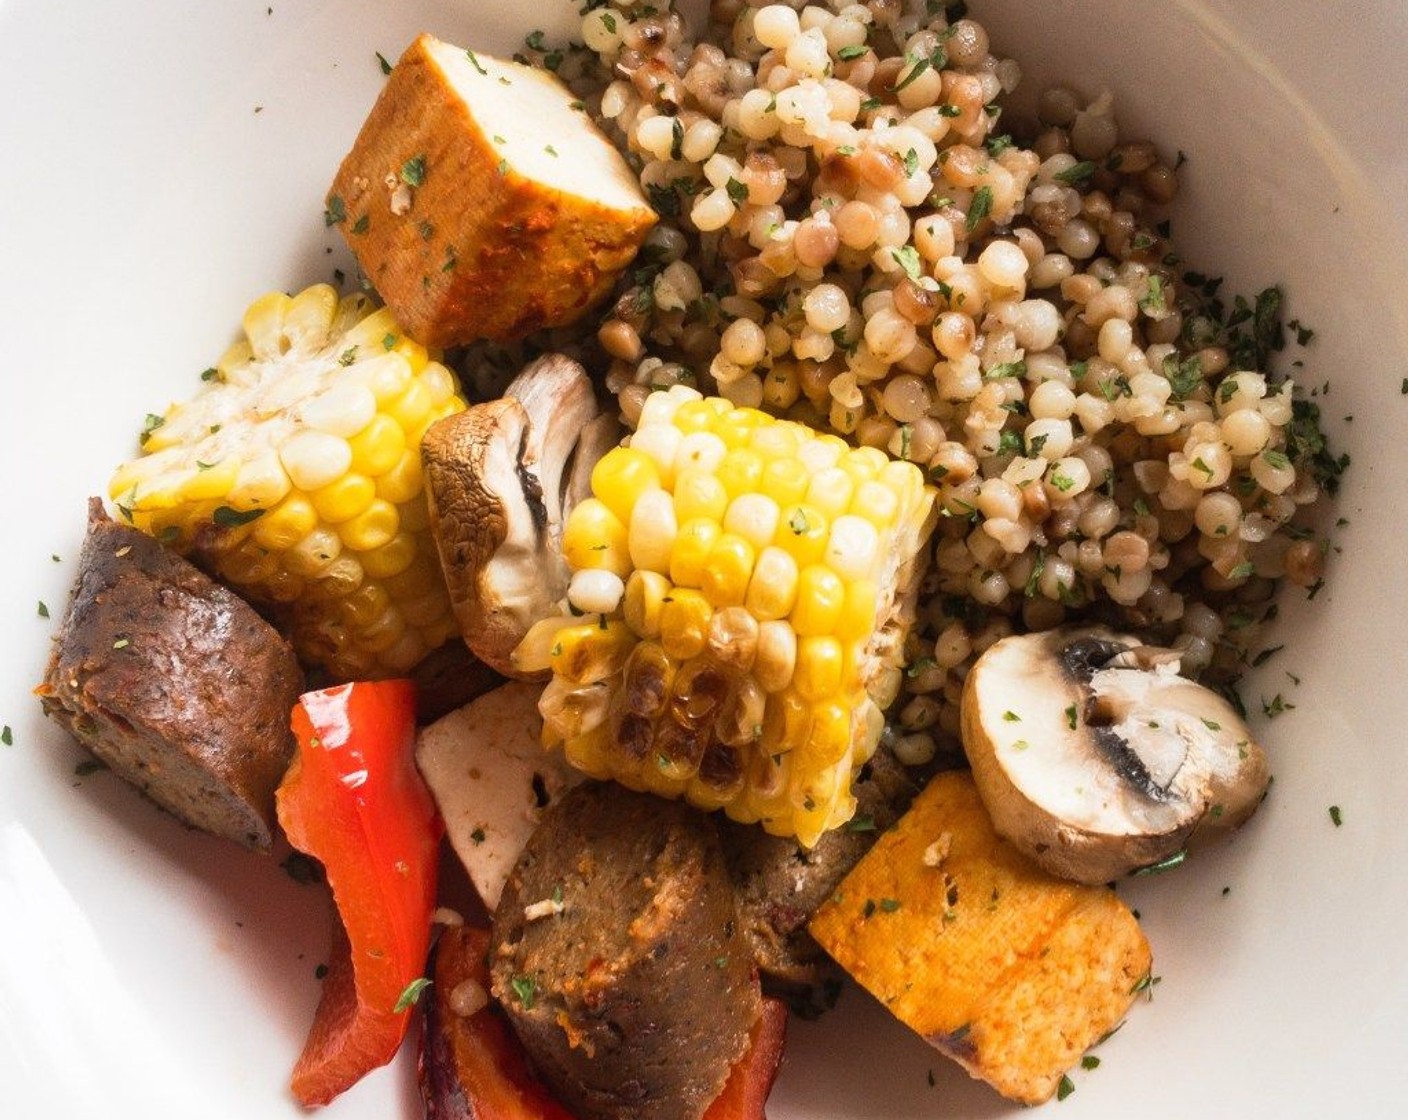 step 5 Add 1/2 cup cooked couscous to a bowl, pull cooked food off of skewer onto couscous. Serve and enjoy!